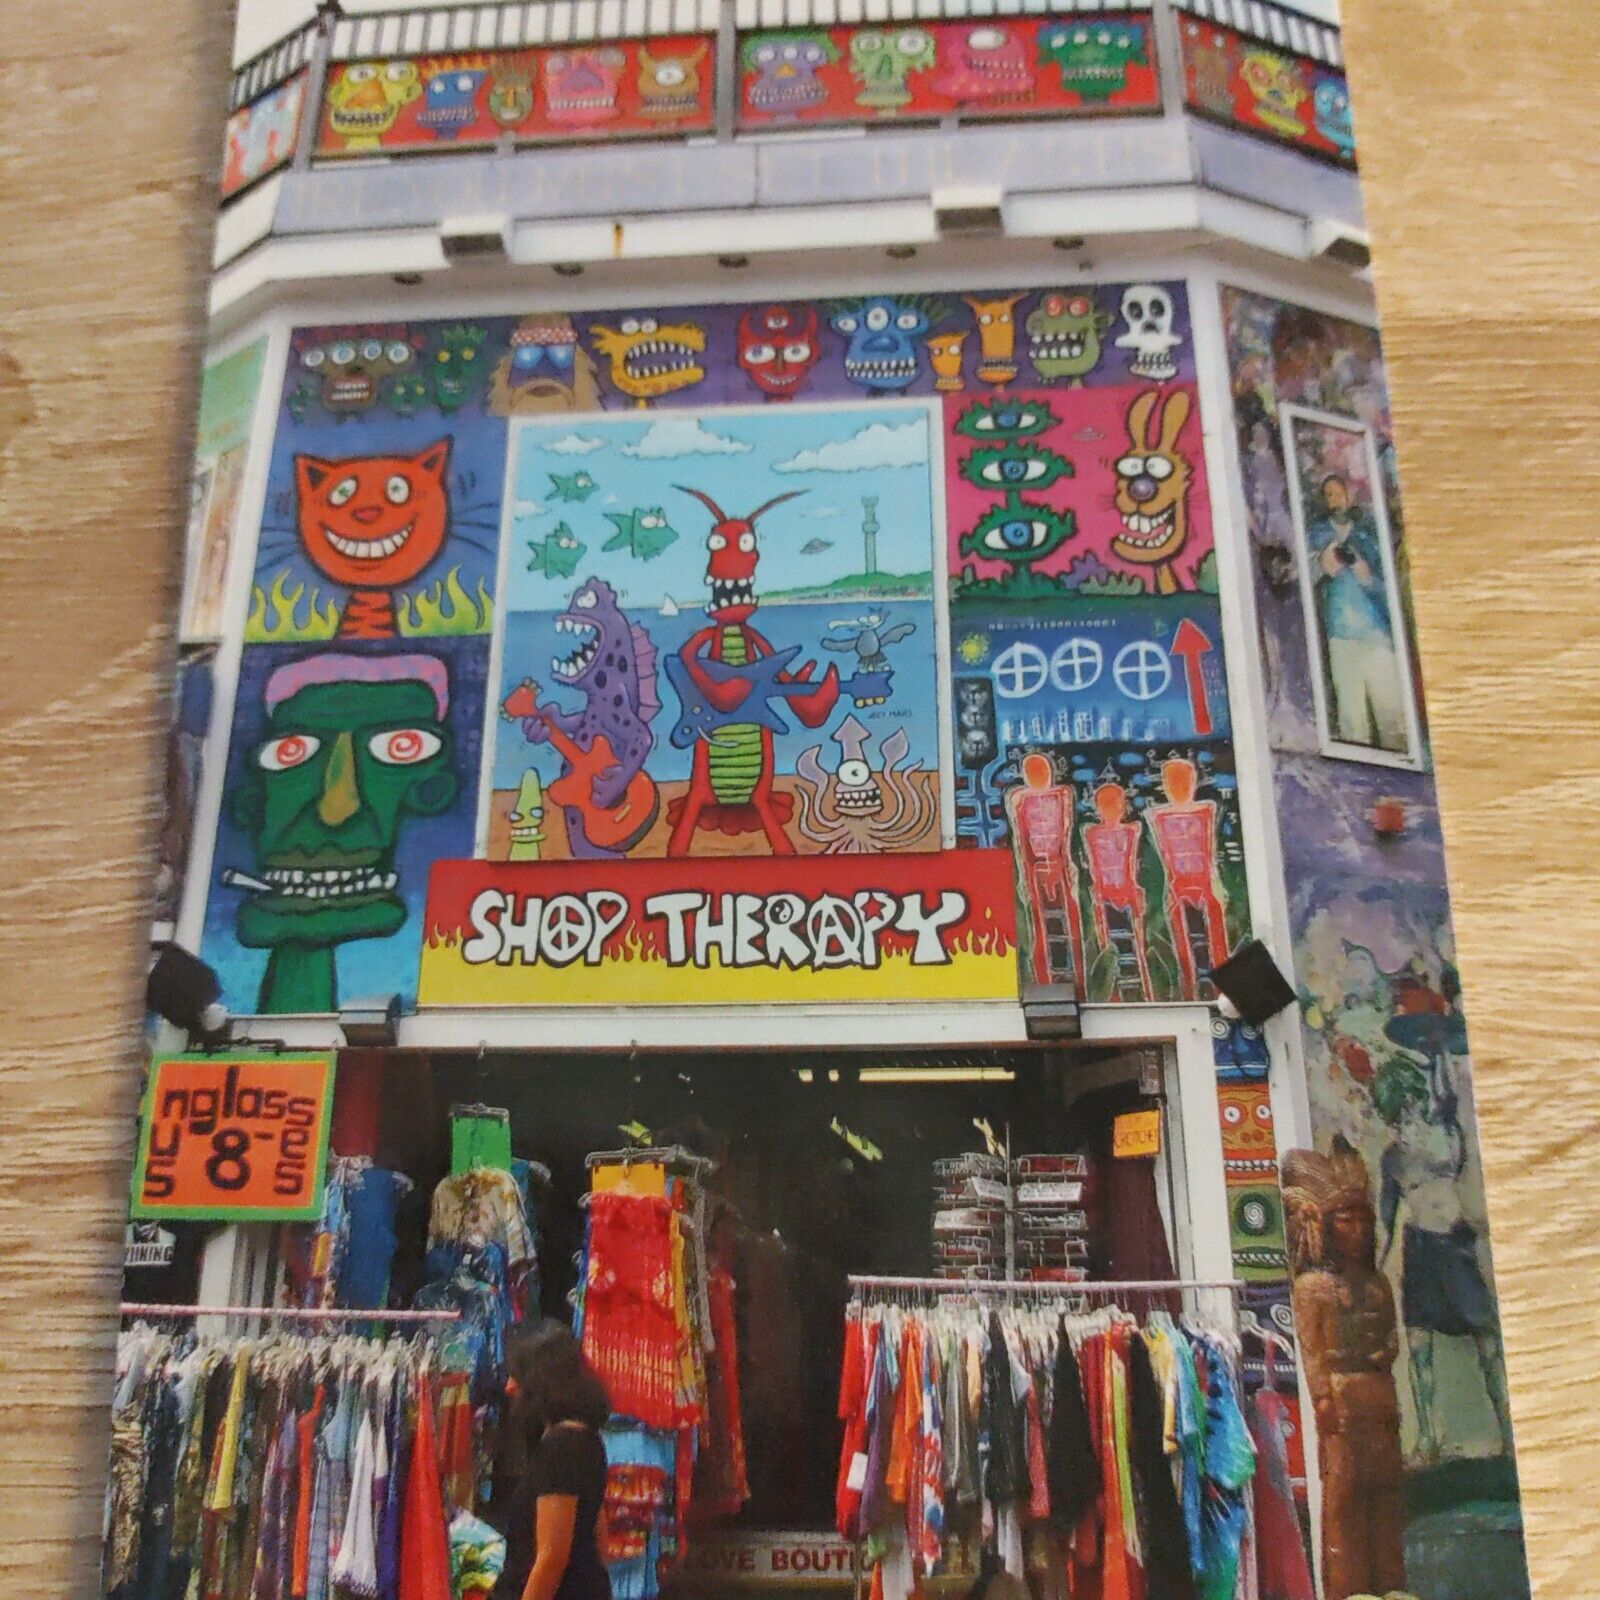 Shop Therapy Joey Mars Commercial Street Provincetown MA Postcard